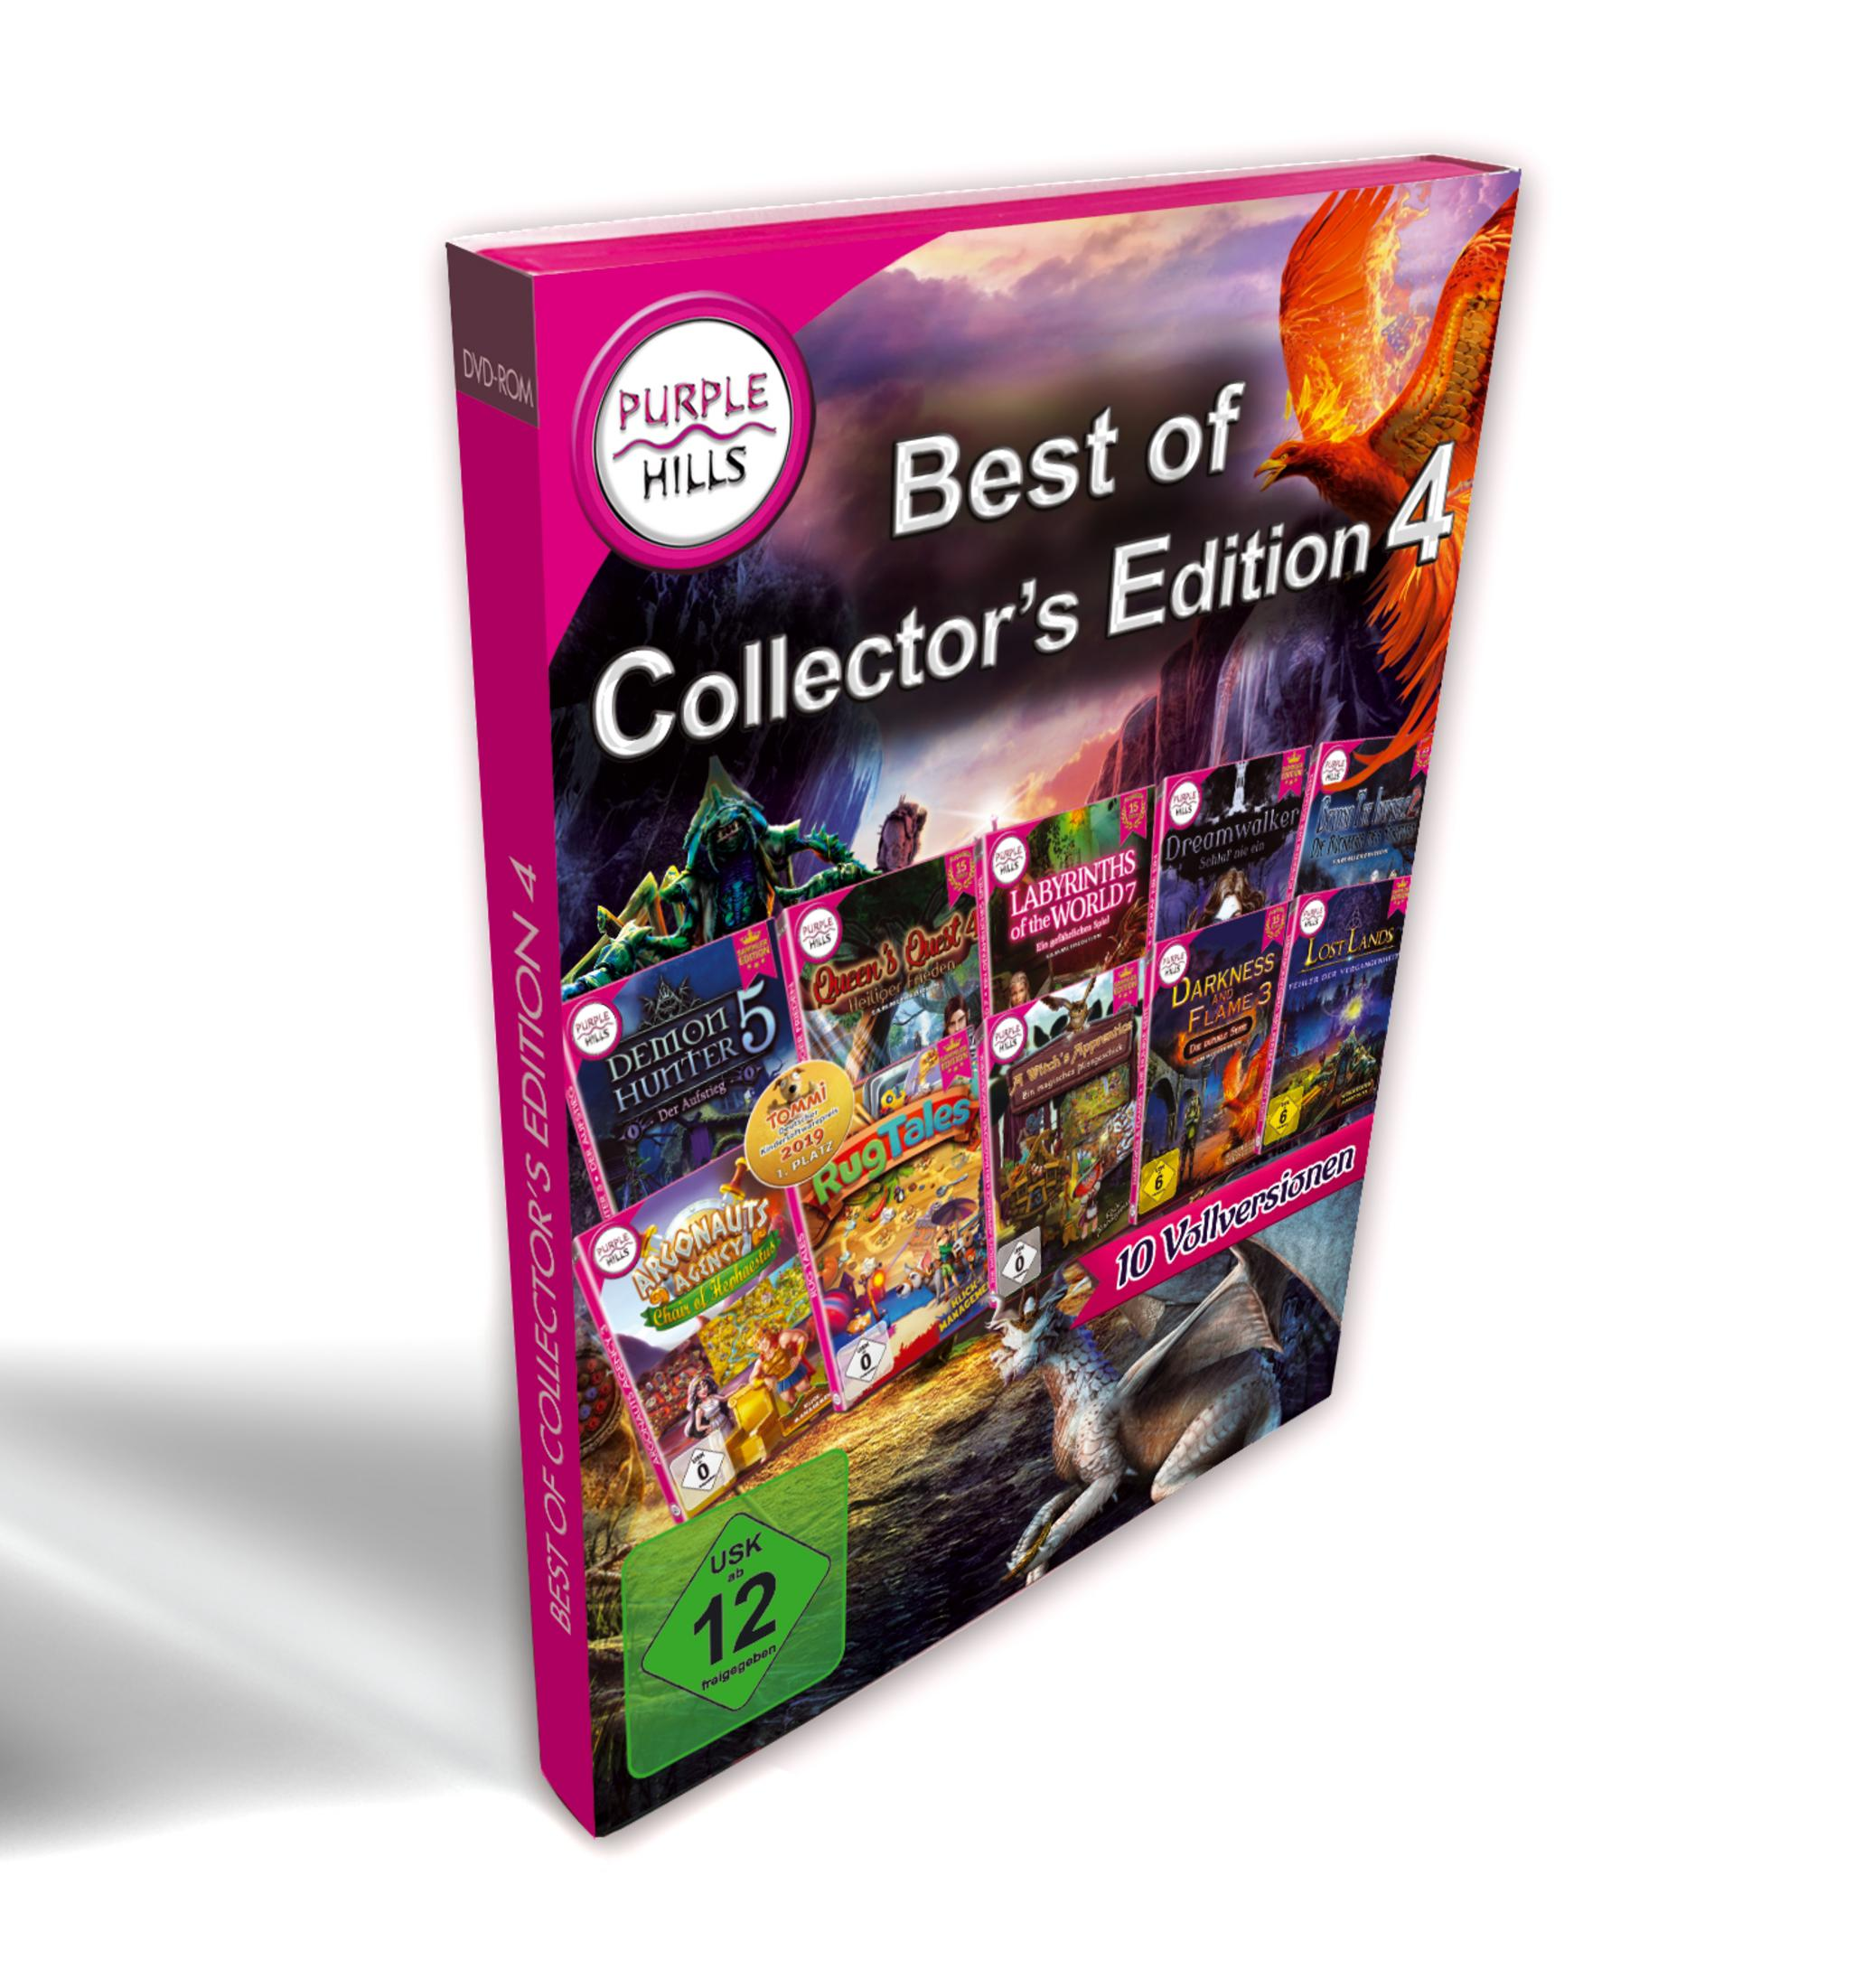 [PC] EDITION BEST 4 OF S COLLECTOR -